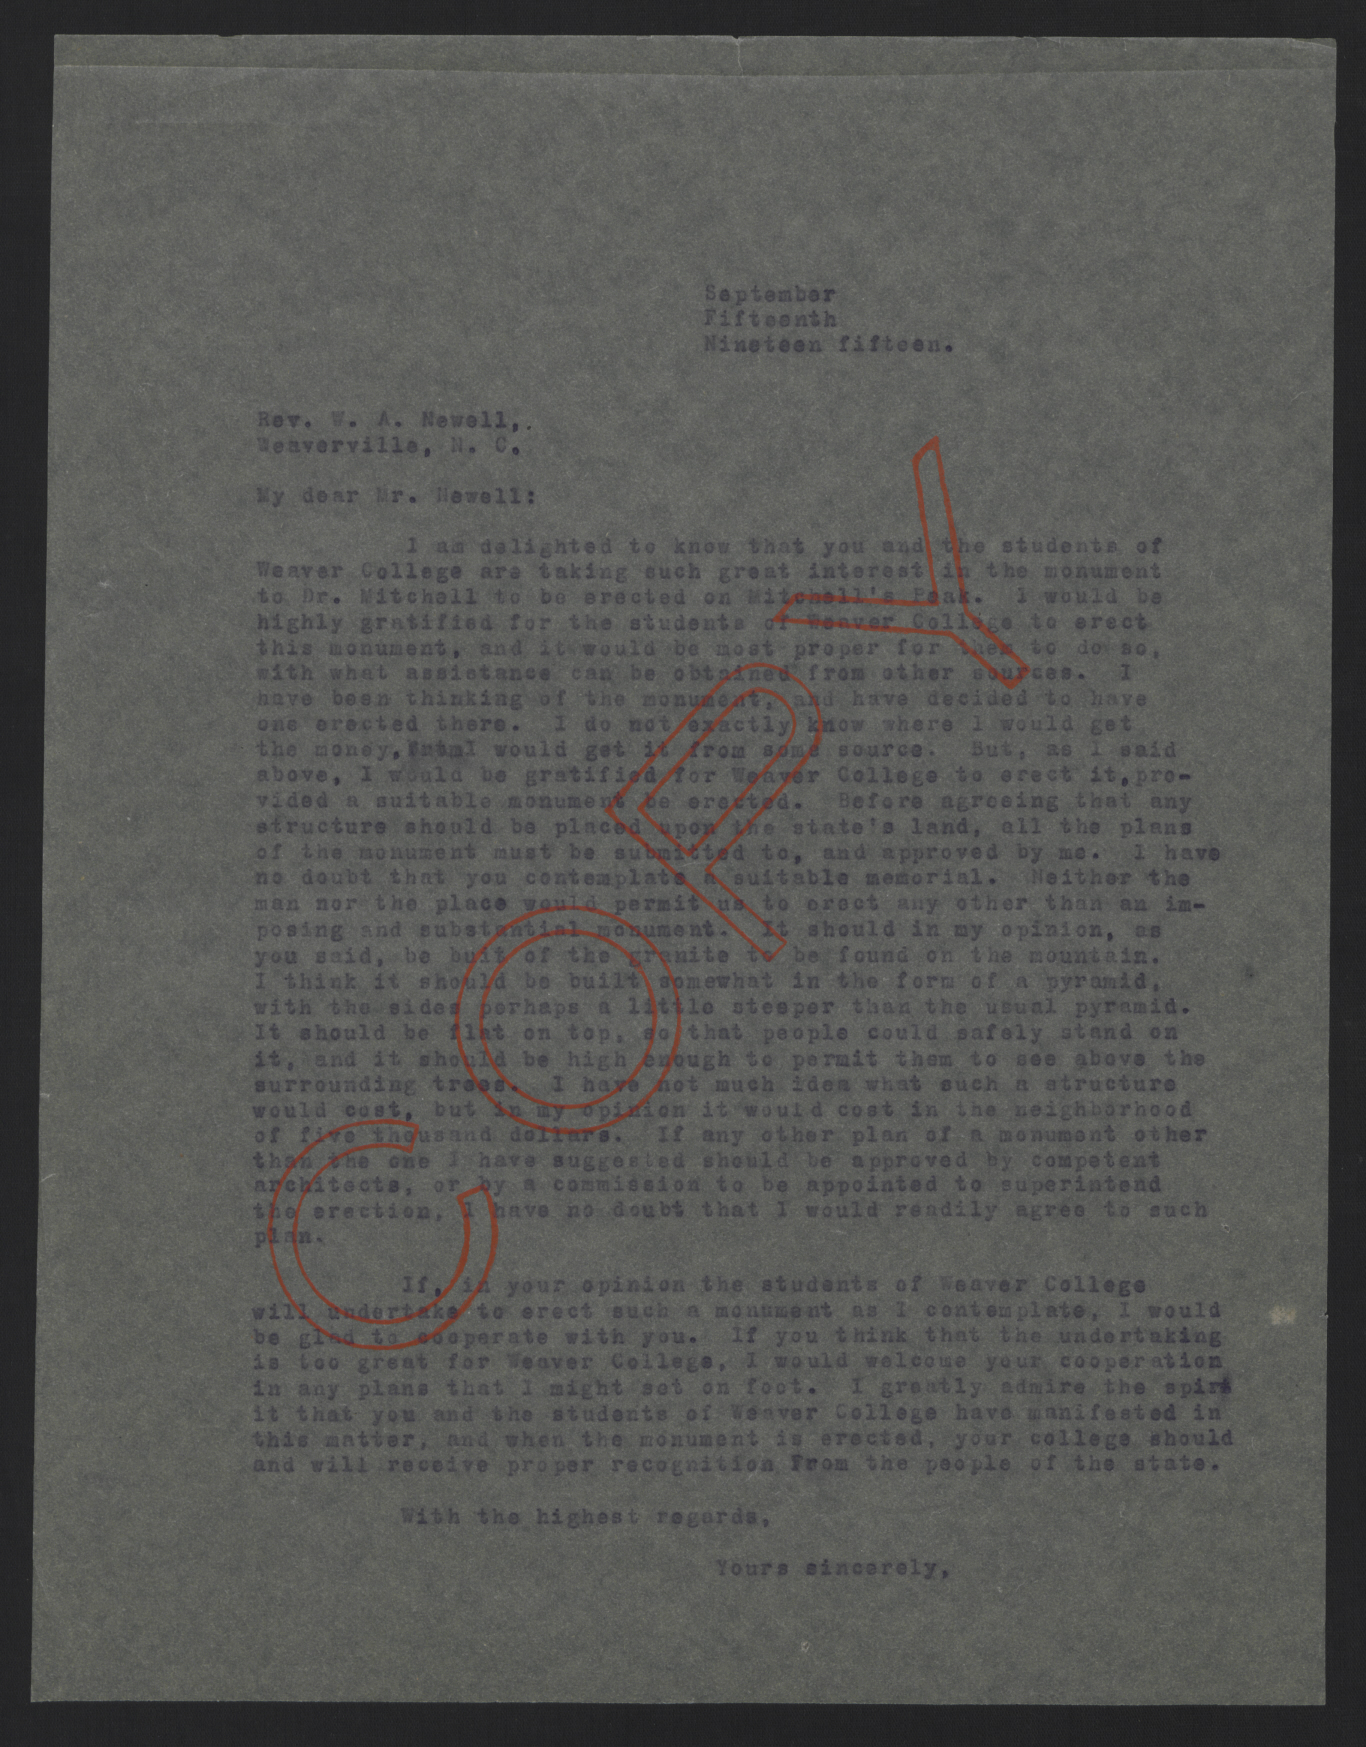 Letter from Craig to Newell, September 15, 1915